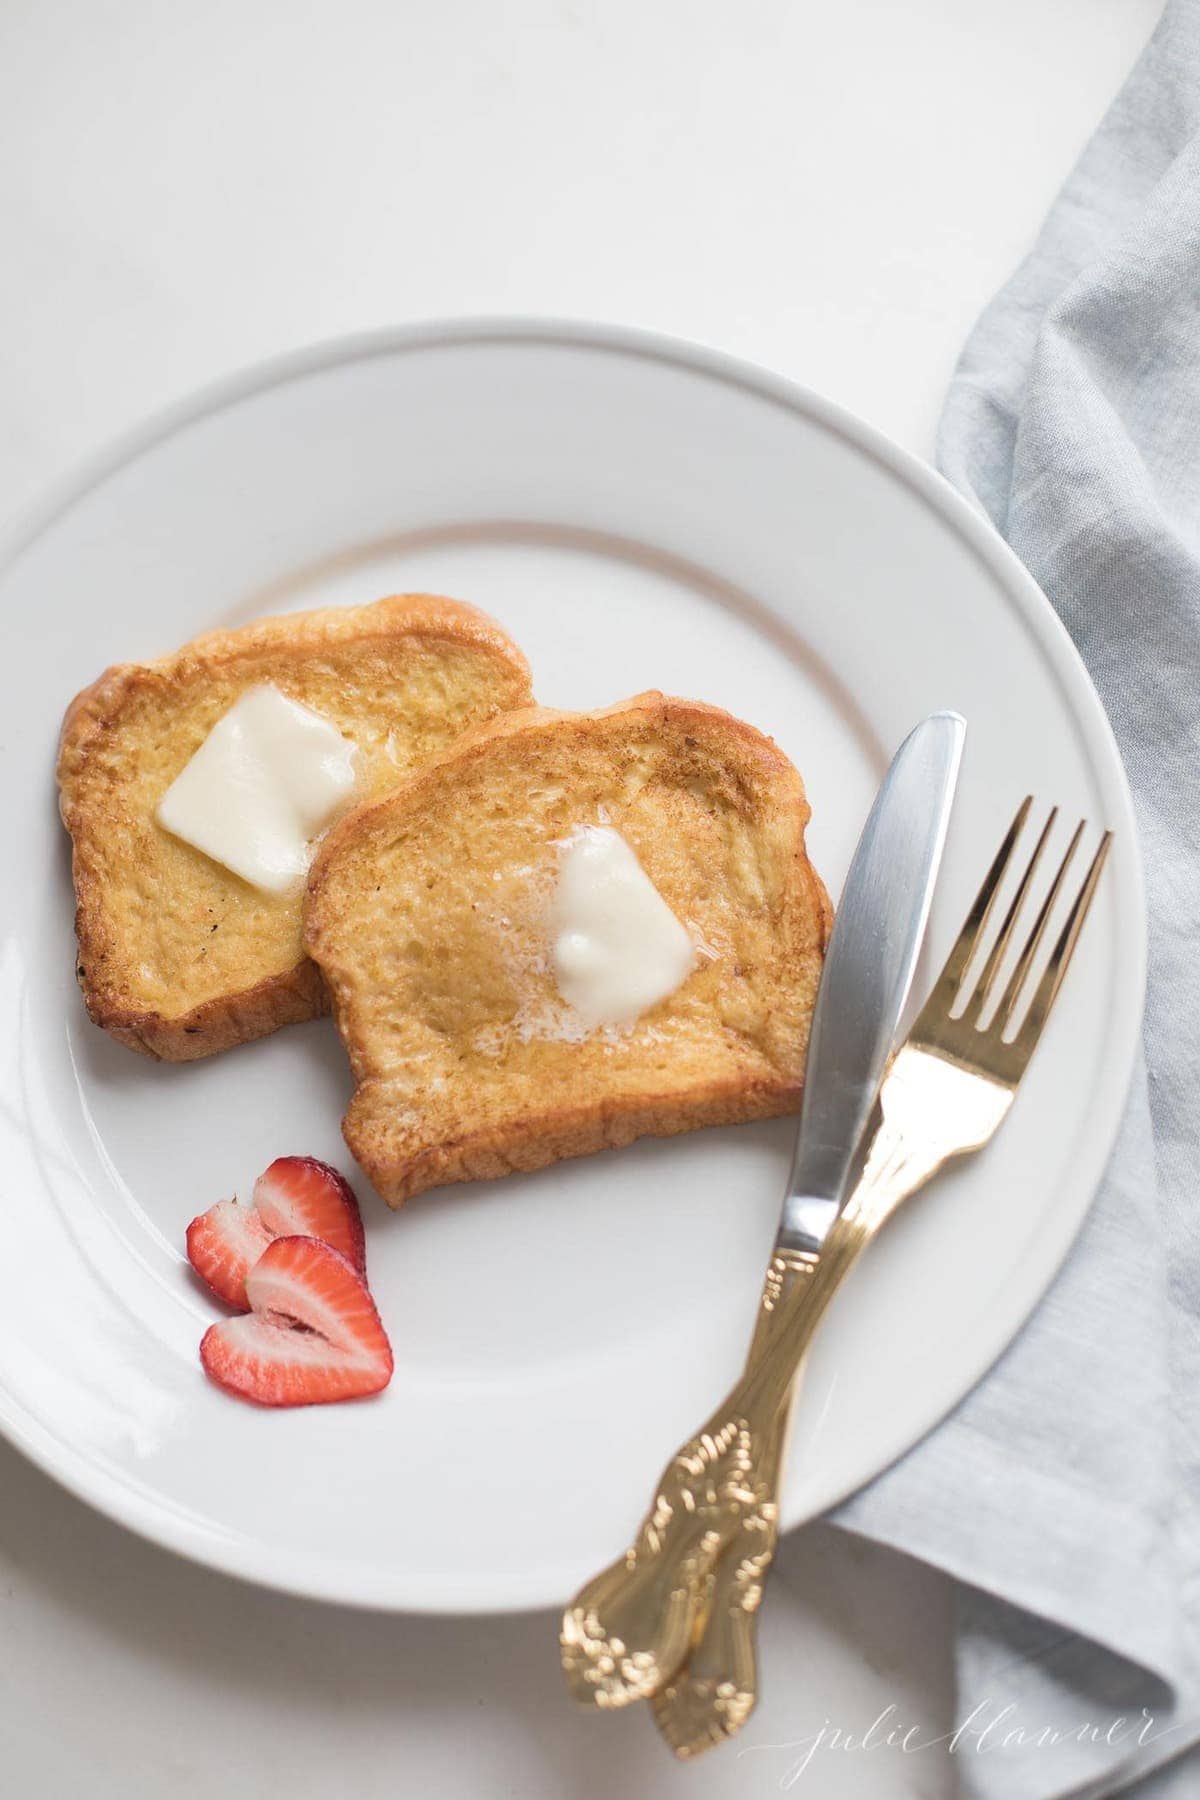 Brioche French toast topped with butter on a white plate, knife and fork to the side.